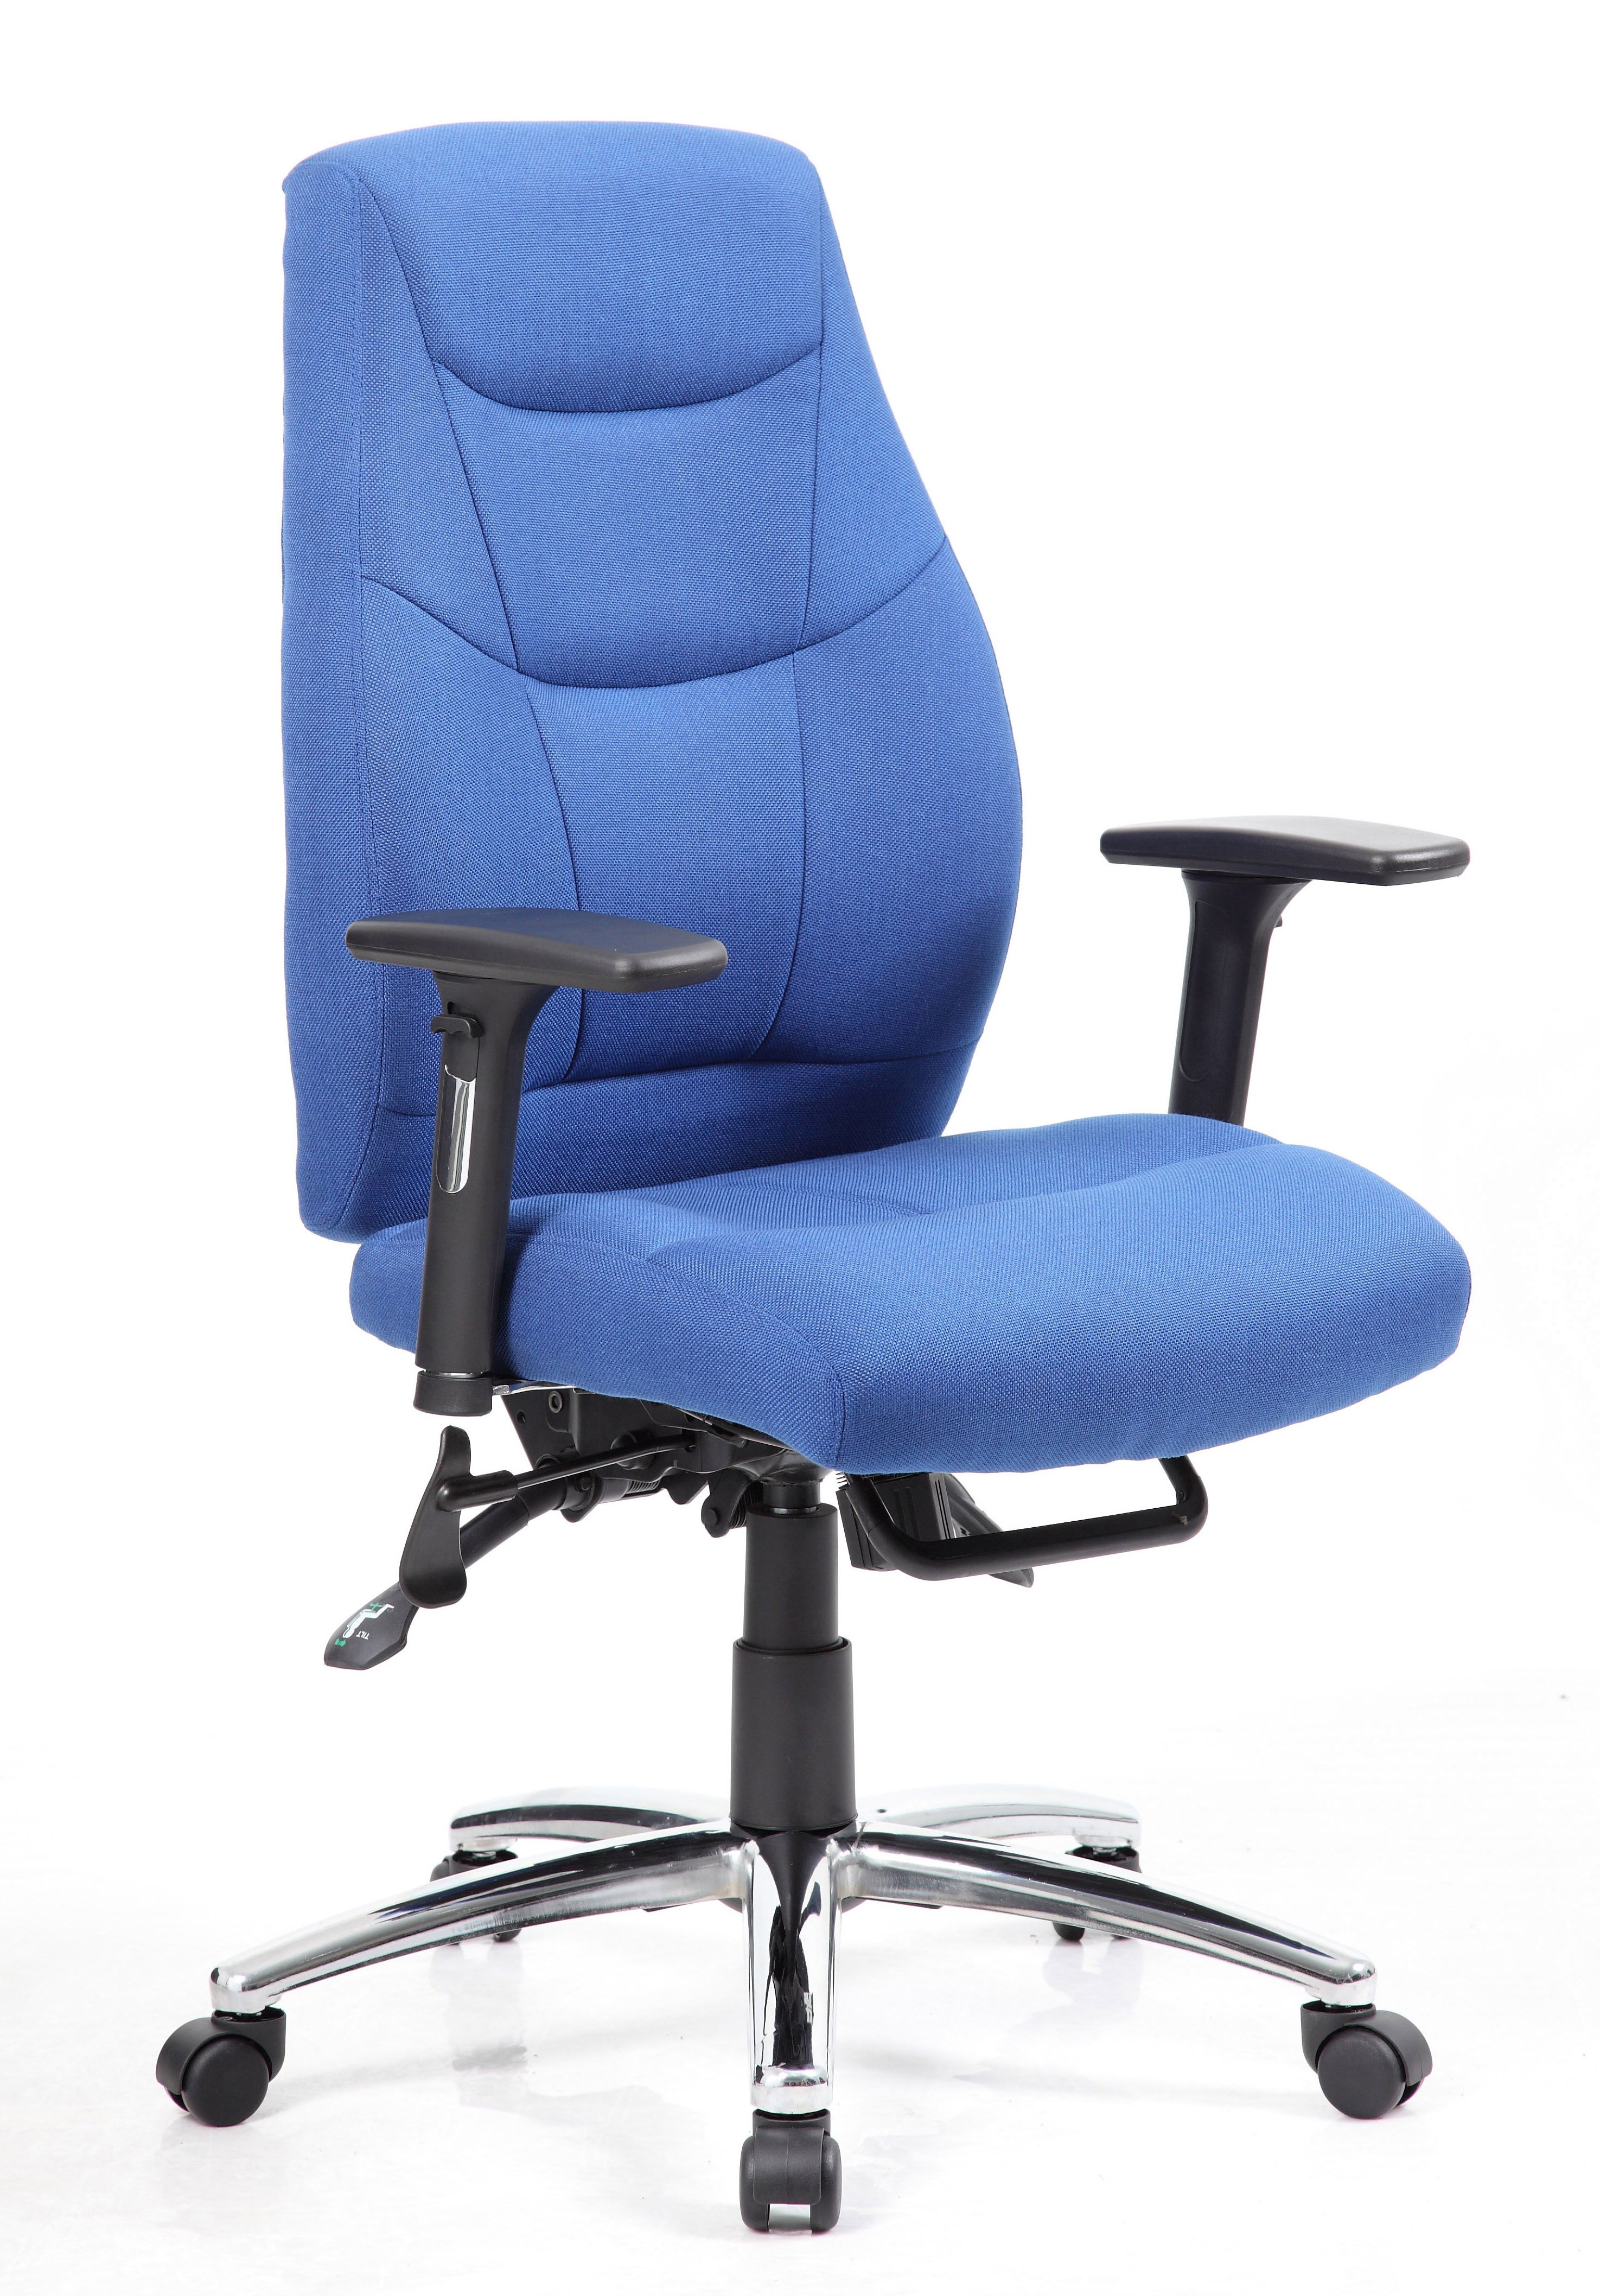 Fabric Office Chairs | Fabric Desk Chairs | Fabrics Posture Chairs